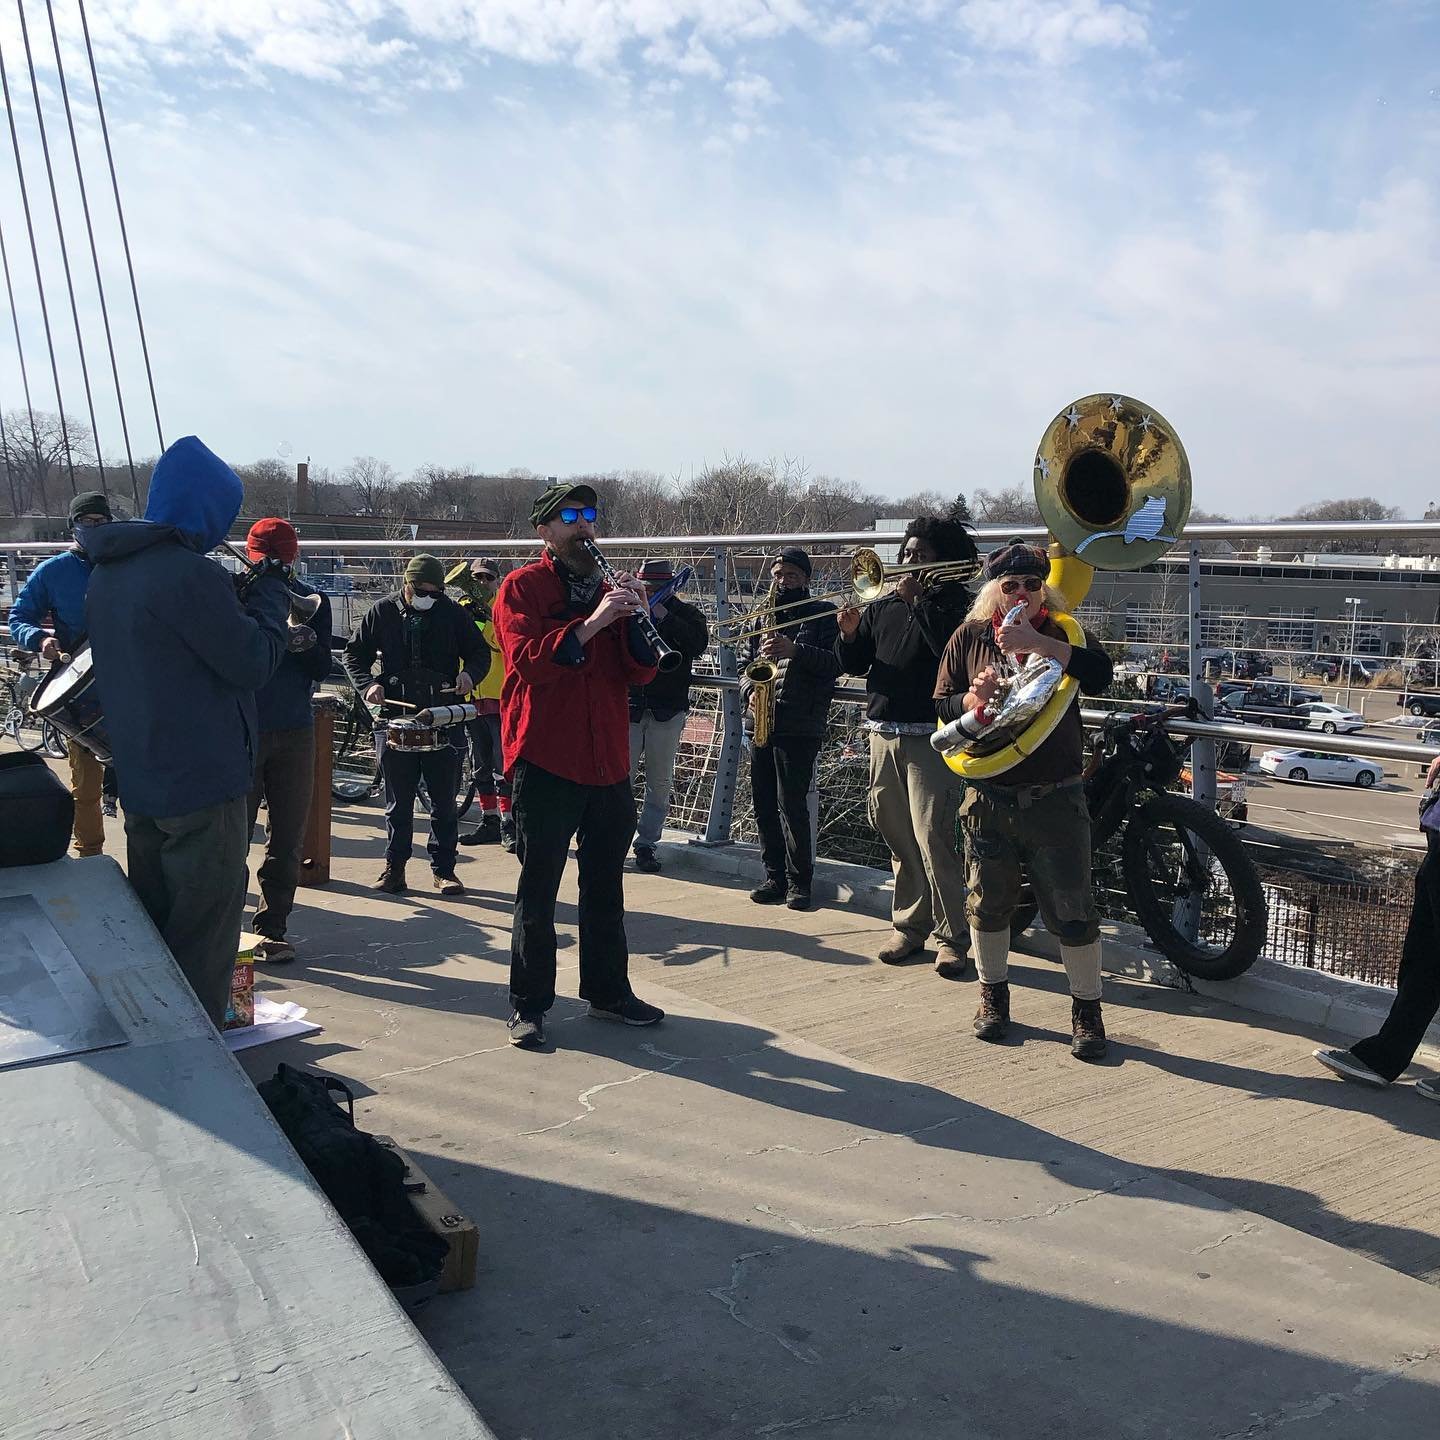 People rallied in support of the East Phillips Indoor Urban Farm on Sunday, March 7. They are standing on the Sabo Bridge overlooking the site.